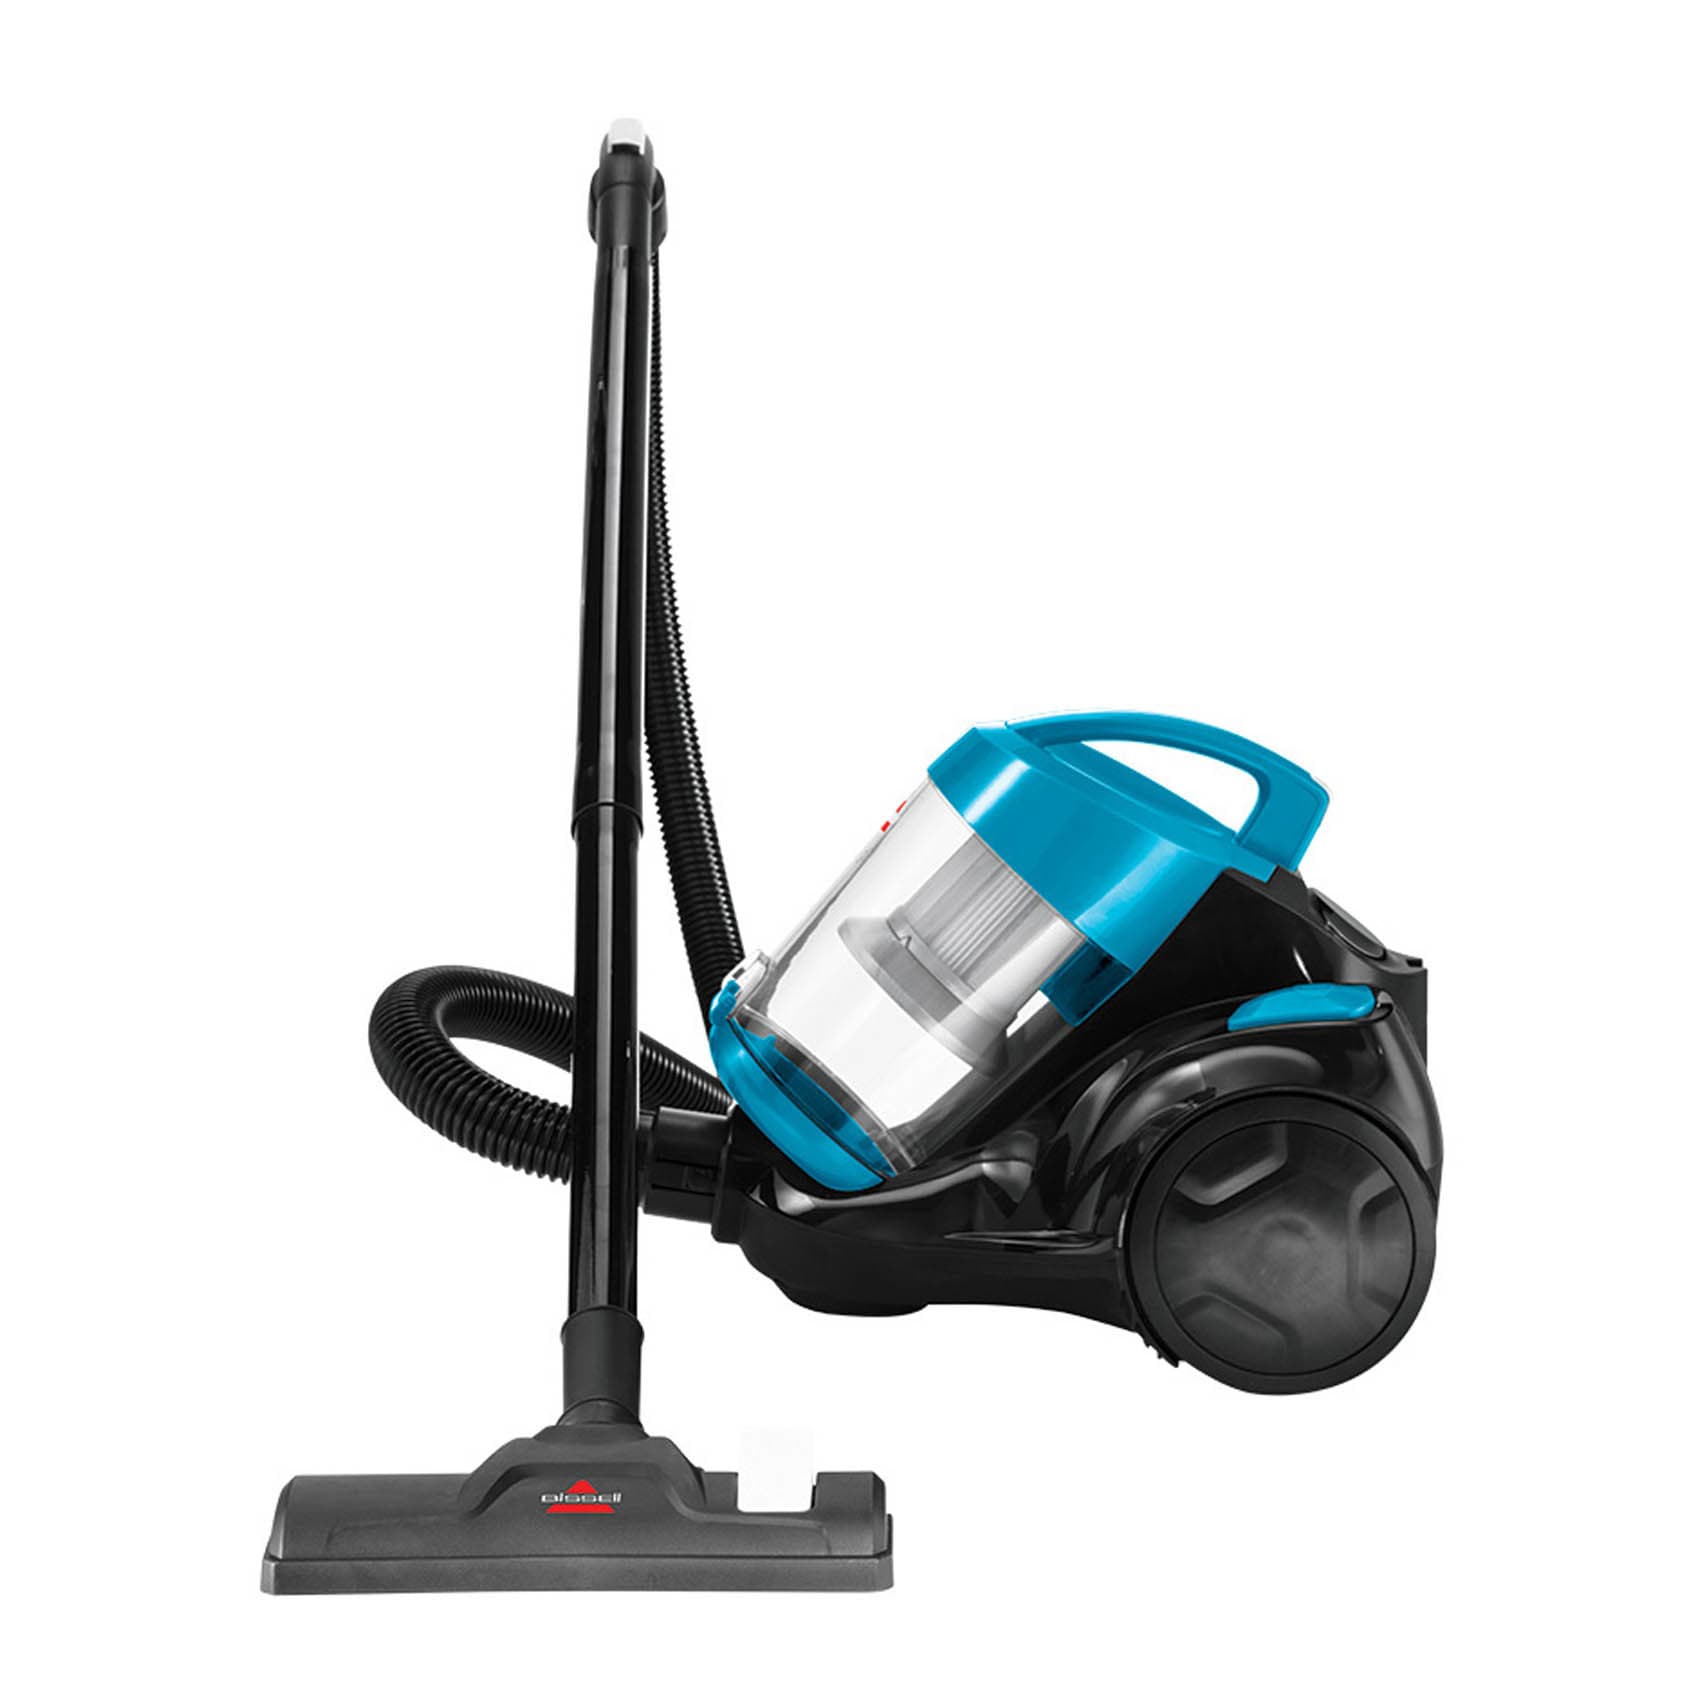 What to know before buying a Bissell Vacuum Cleaner ?